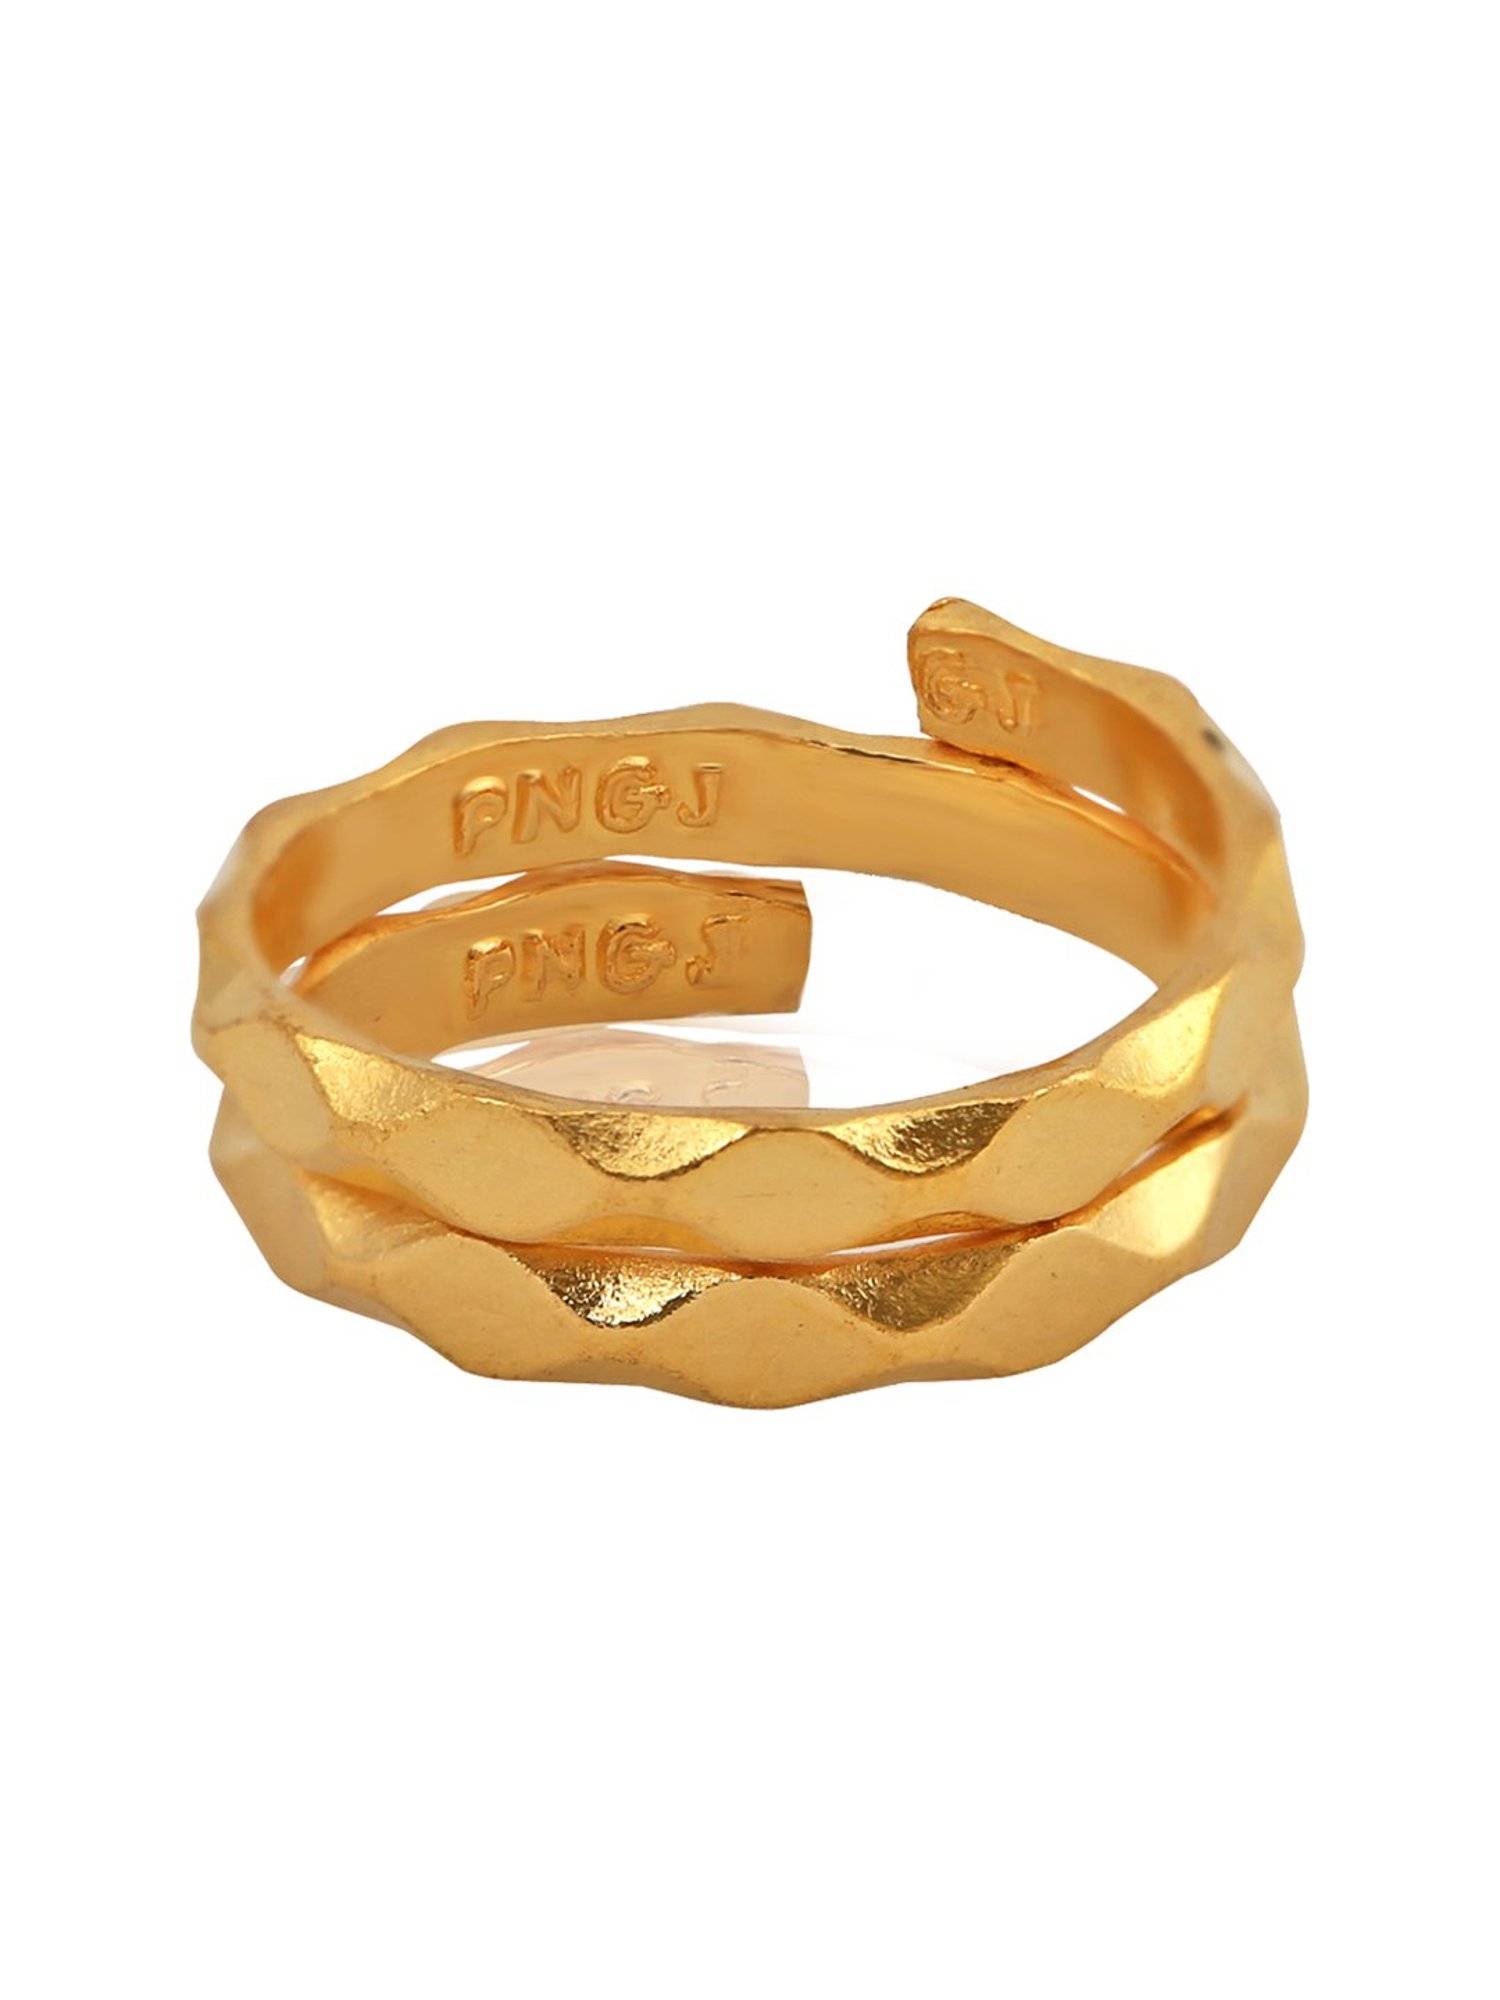 Jewel Ora Men's Men Gold Ring, 7 To 10gm, Size: 18 19 20 21 22 23 24 25 26  at Rs 38500/piece in Hyderabad